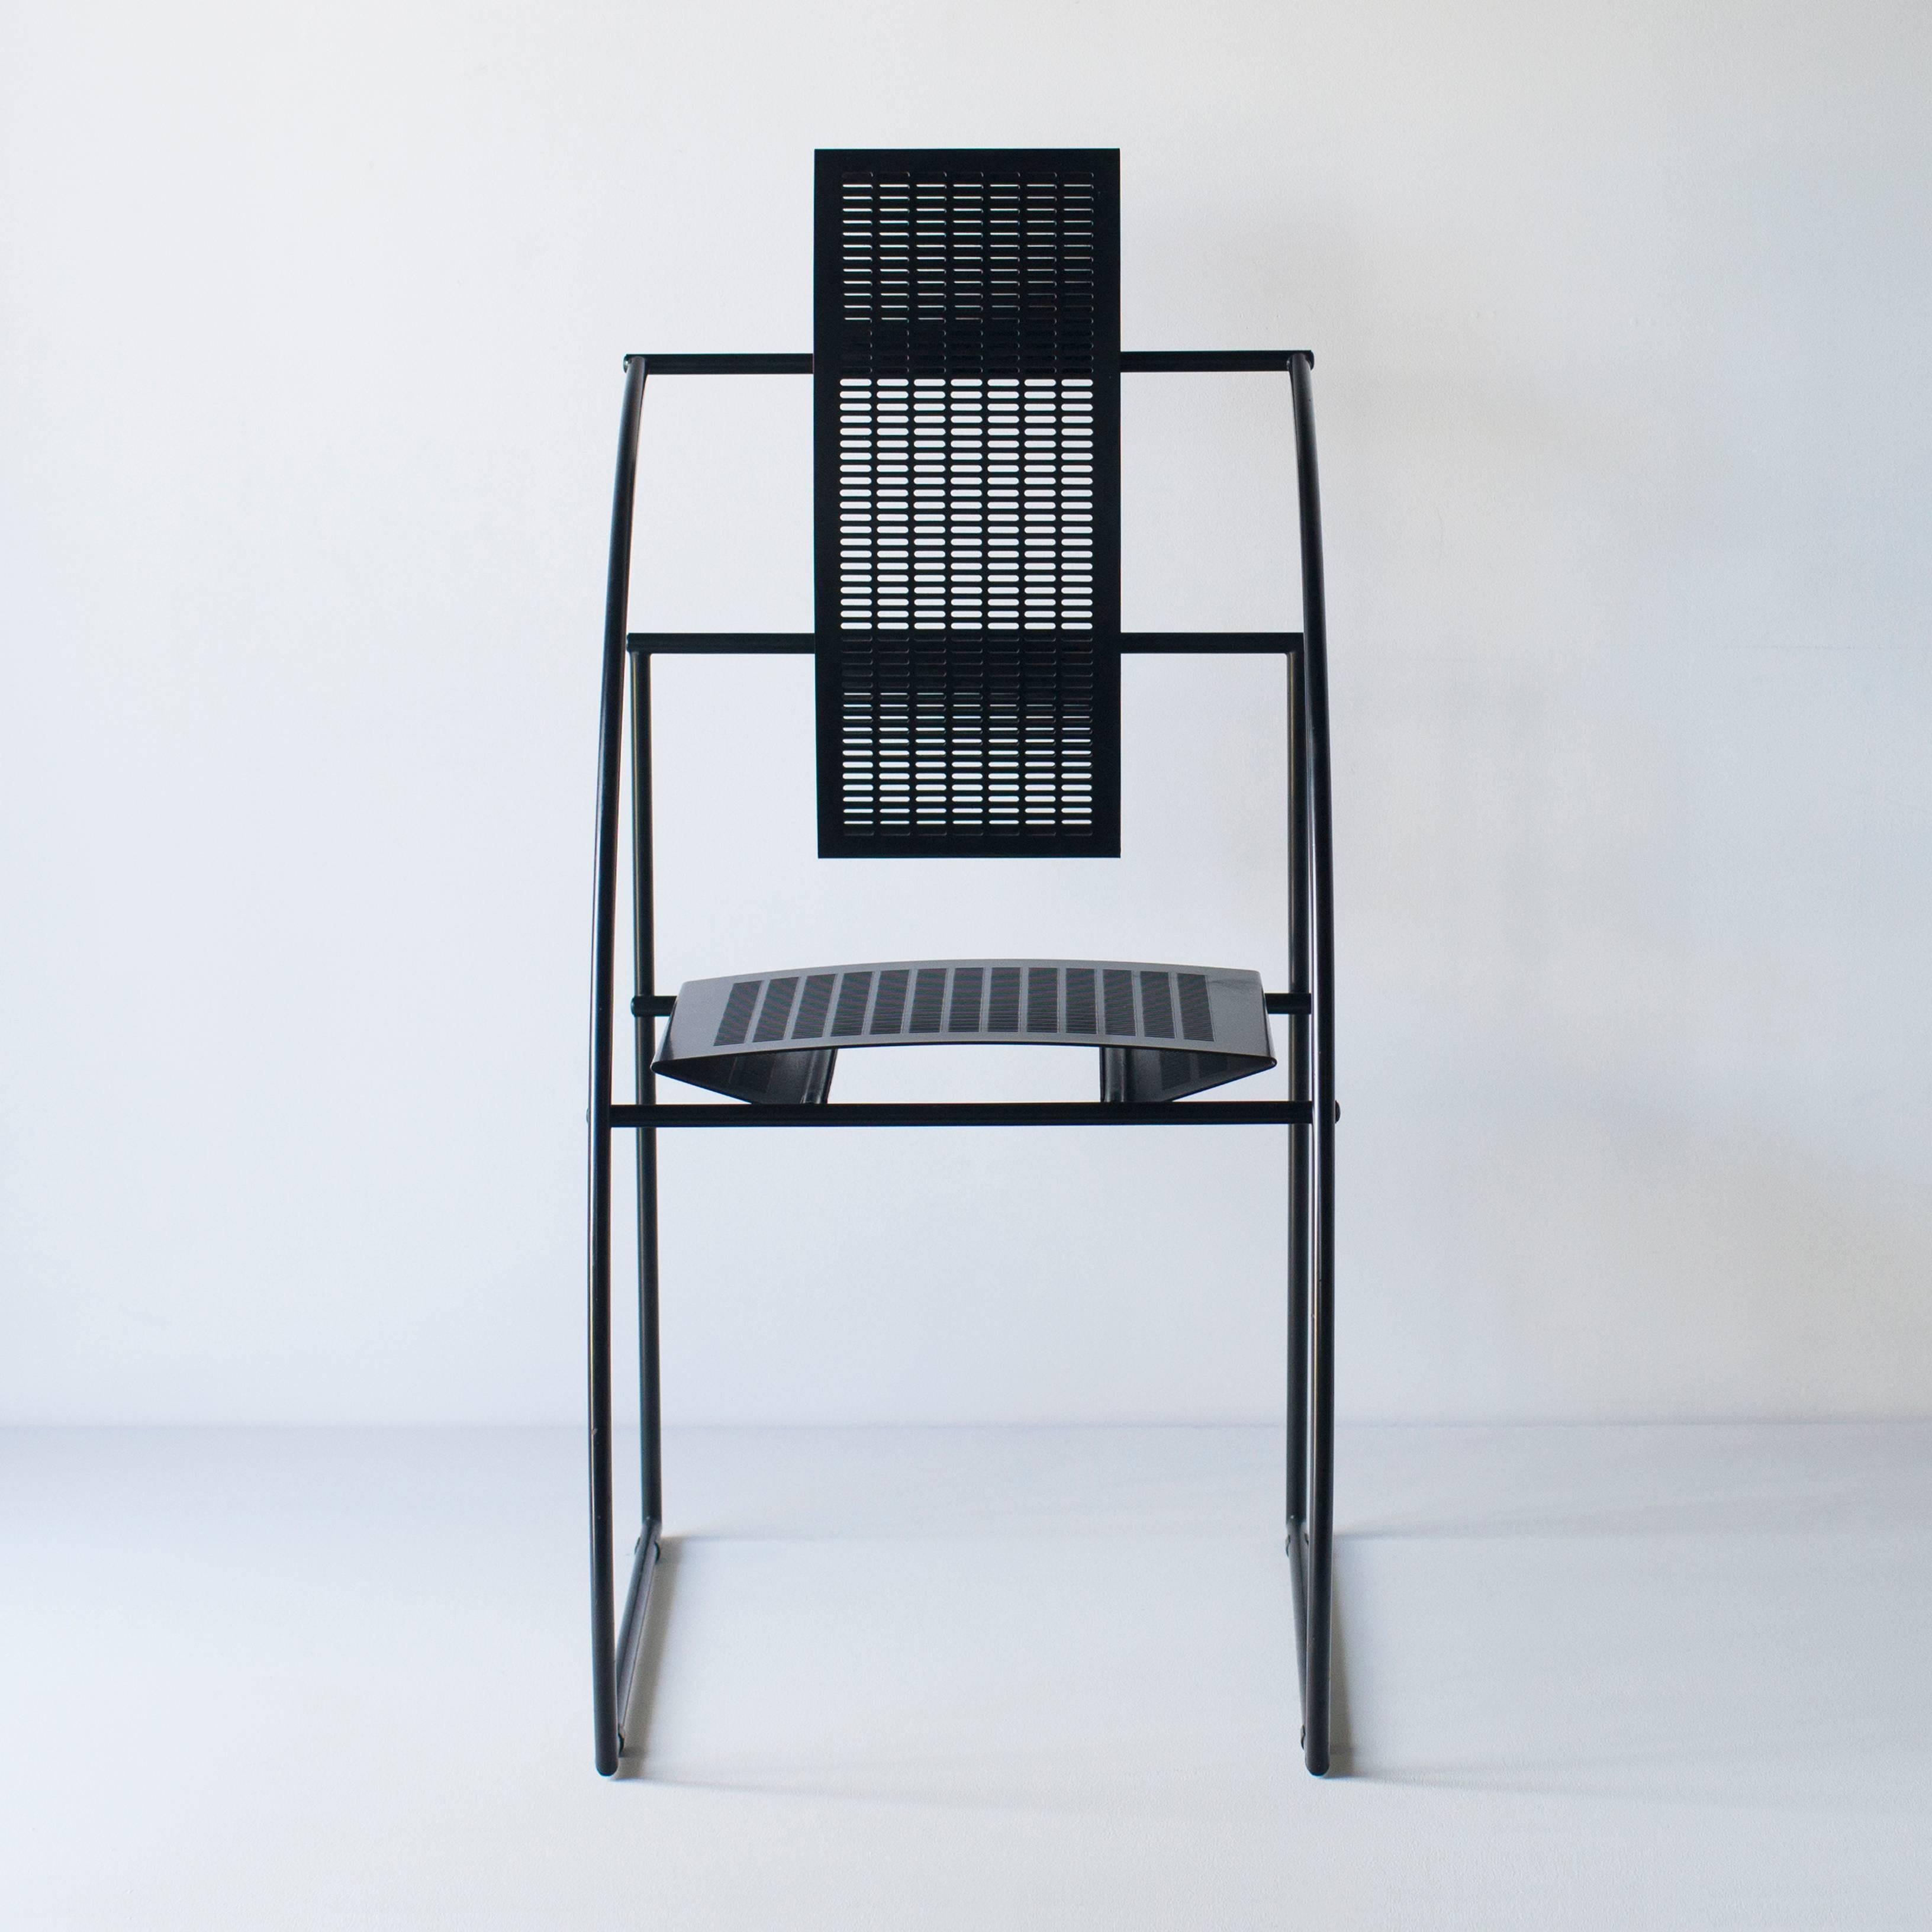 Quinta chair by Italian architect Mario Botta. Black steel pipe frame and black bent punching metal sheet seat and back. It has very interesting form, but comfortable sitting. 